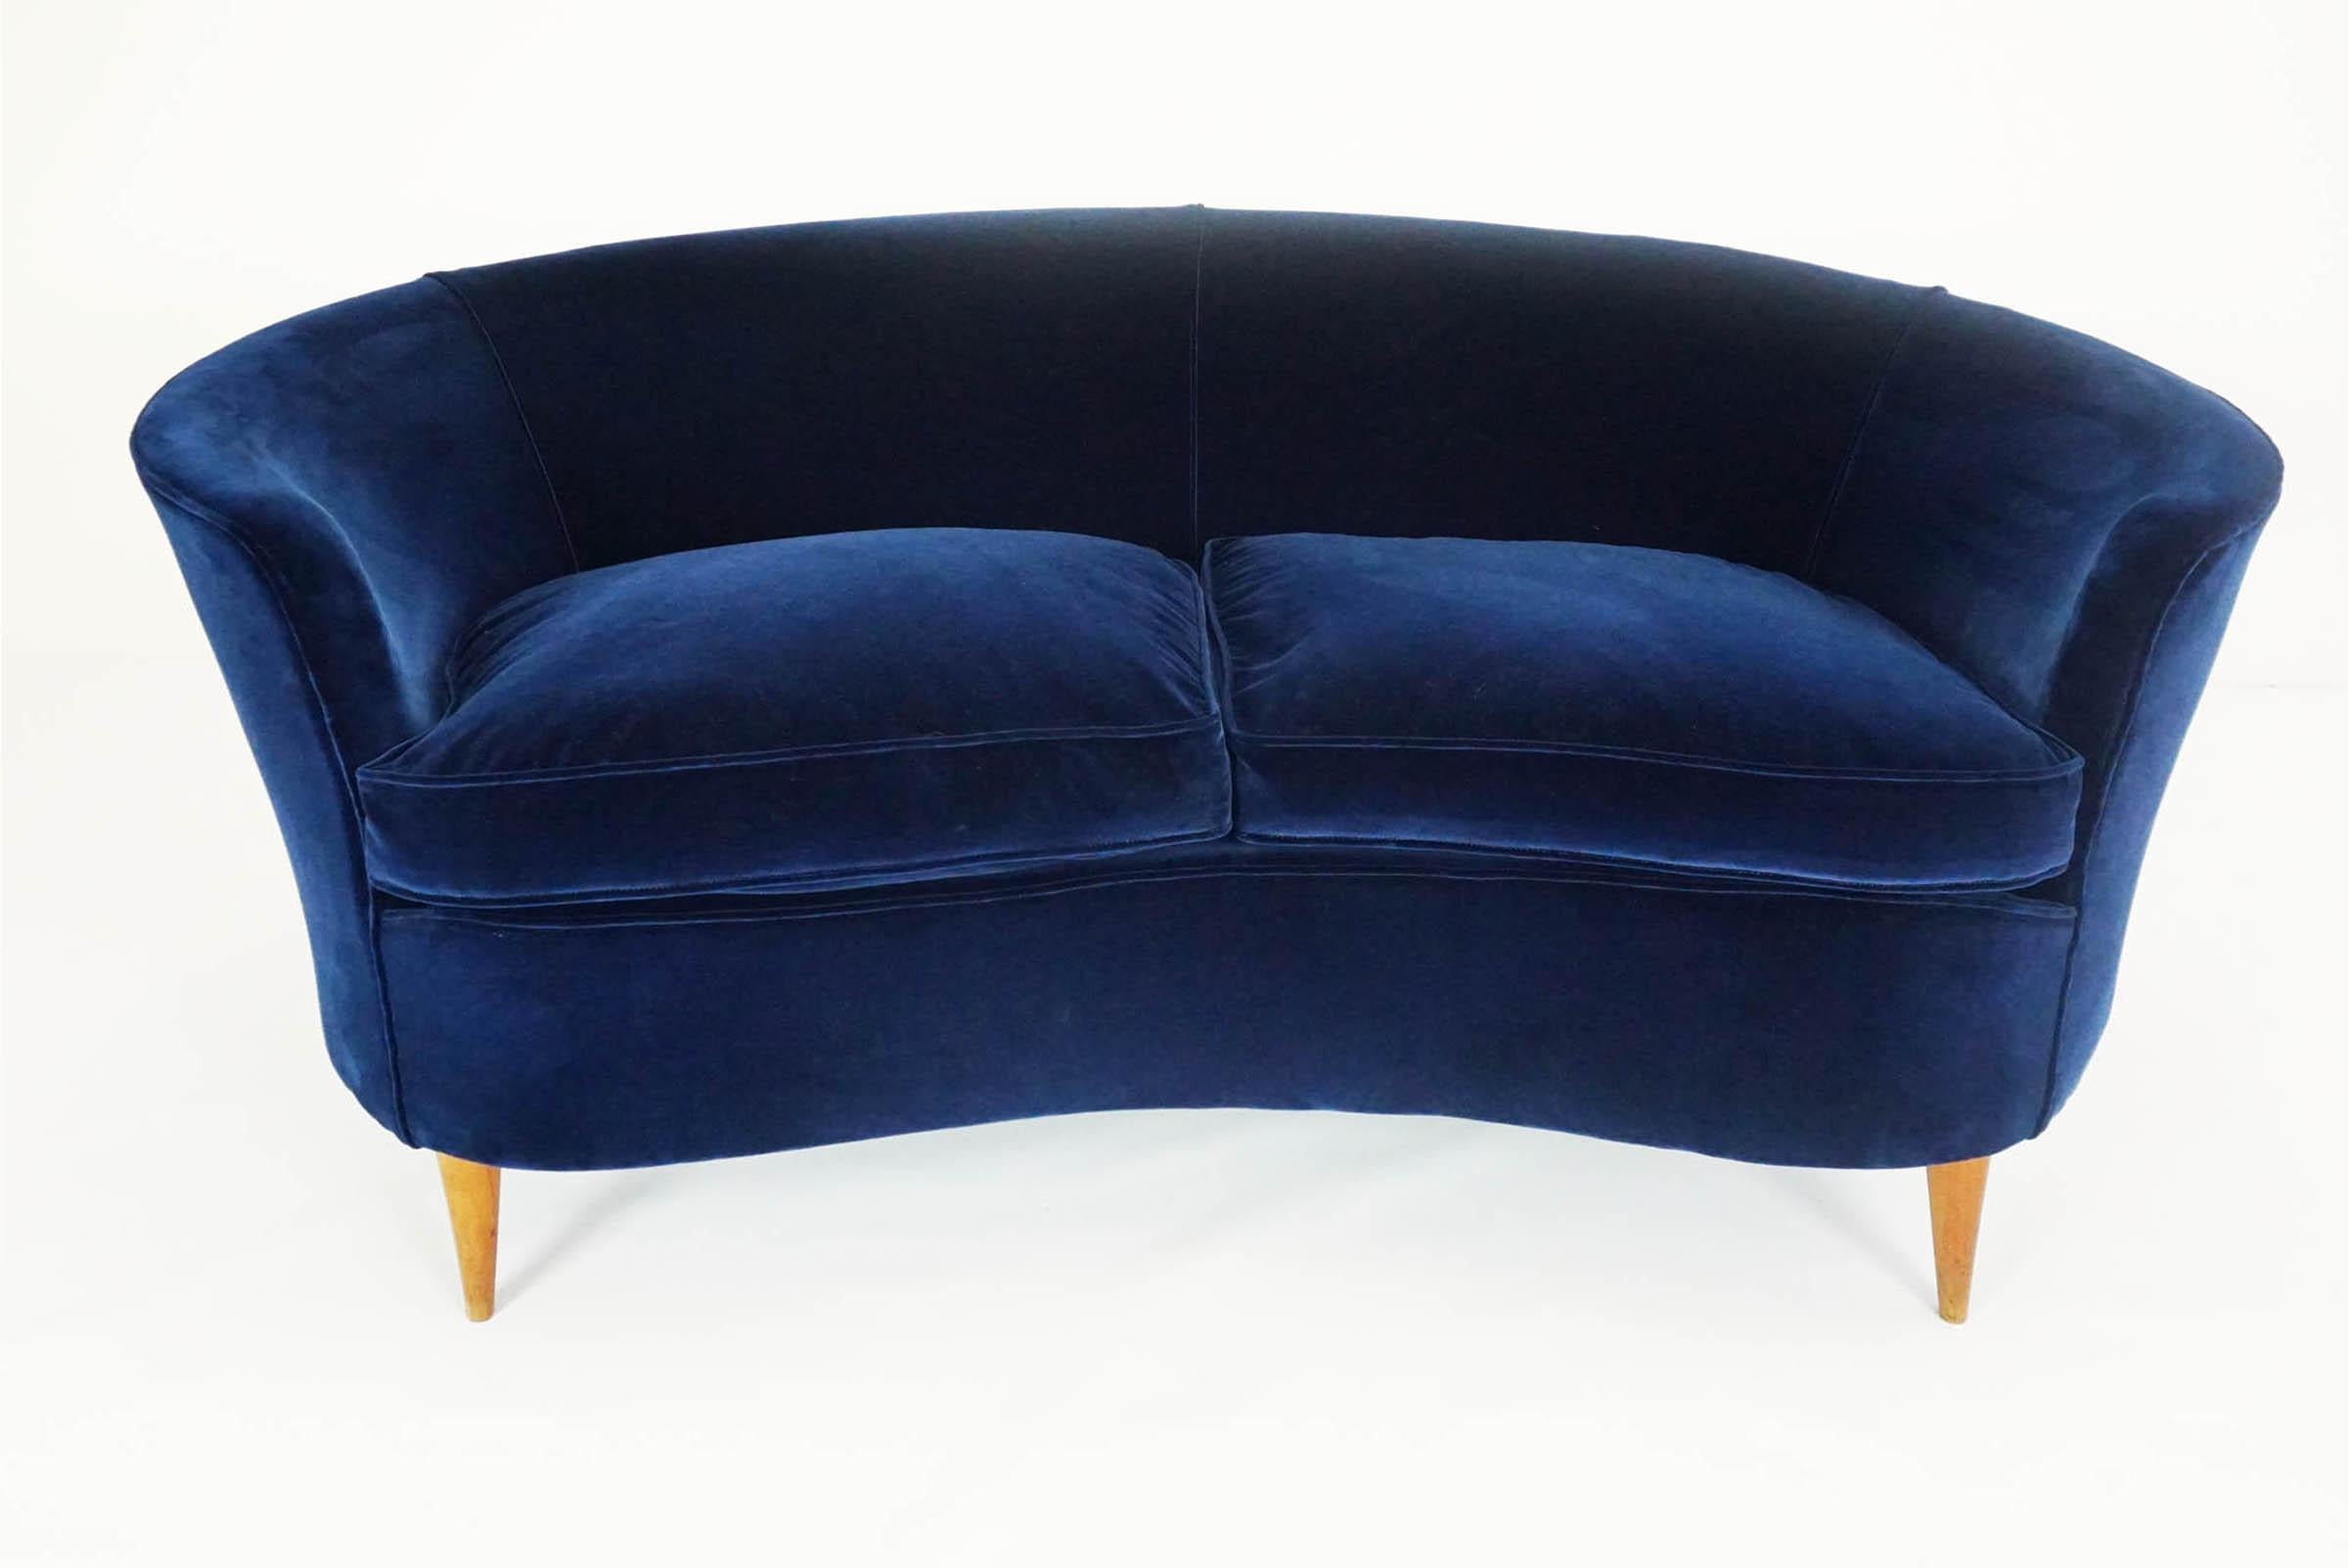 An archived photograph of the present model armchairs and sofa is held as designed by Gio Ponti - in the 